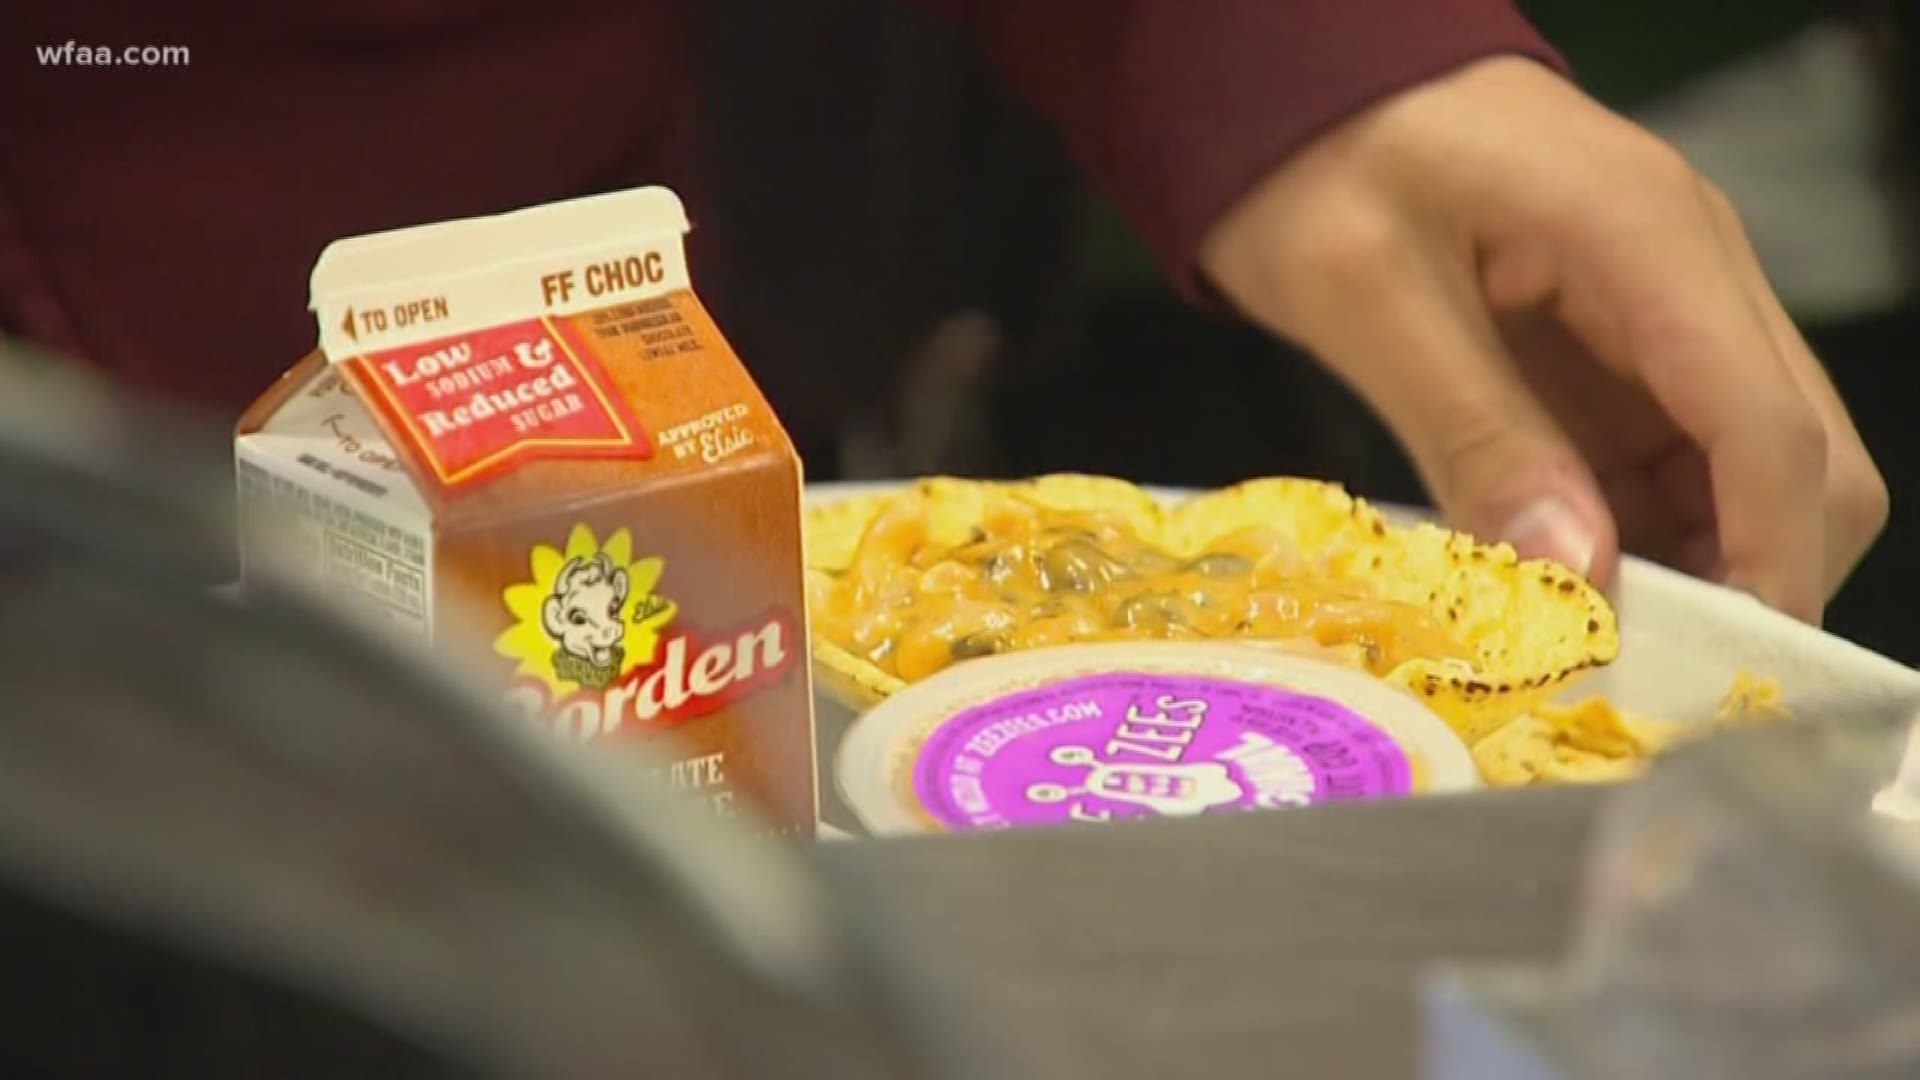 The school district says it'll start withholding food if the students refuse to eat.